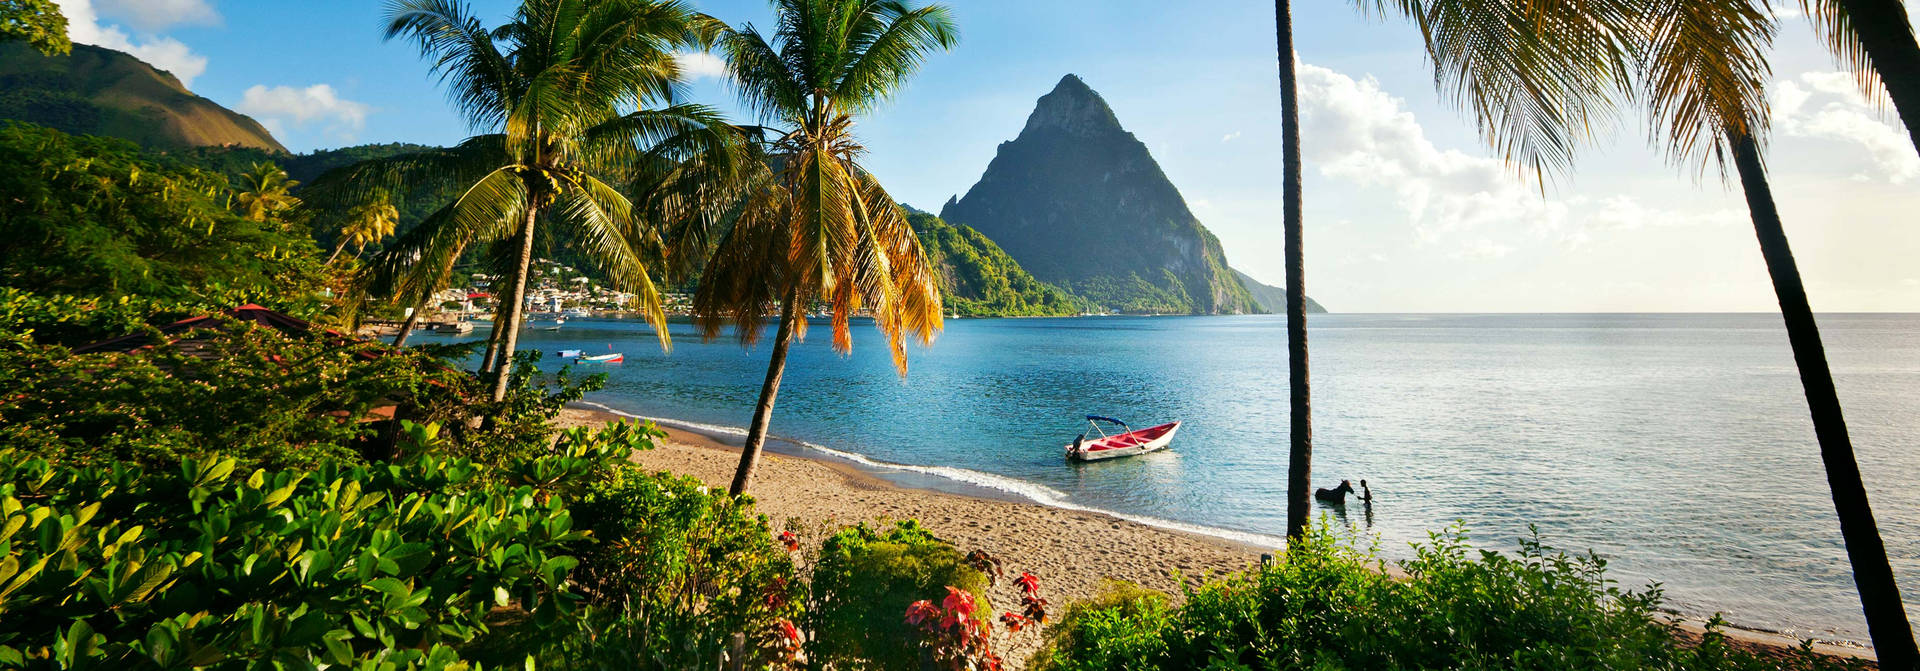 Canoe By The St Lucia Bay Wallpaper